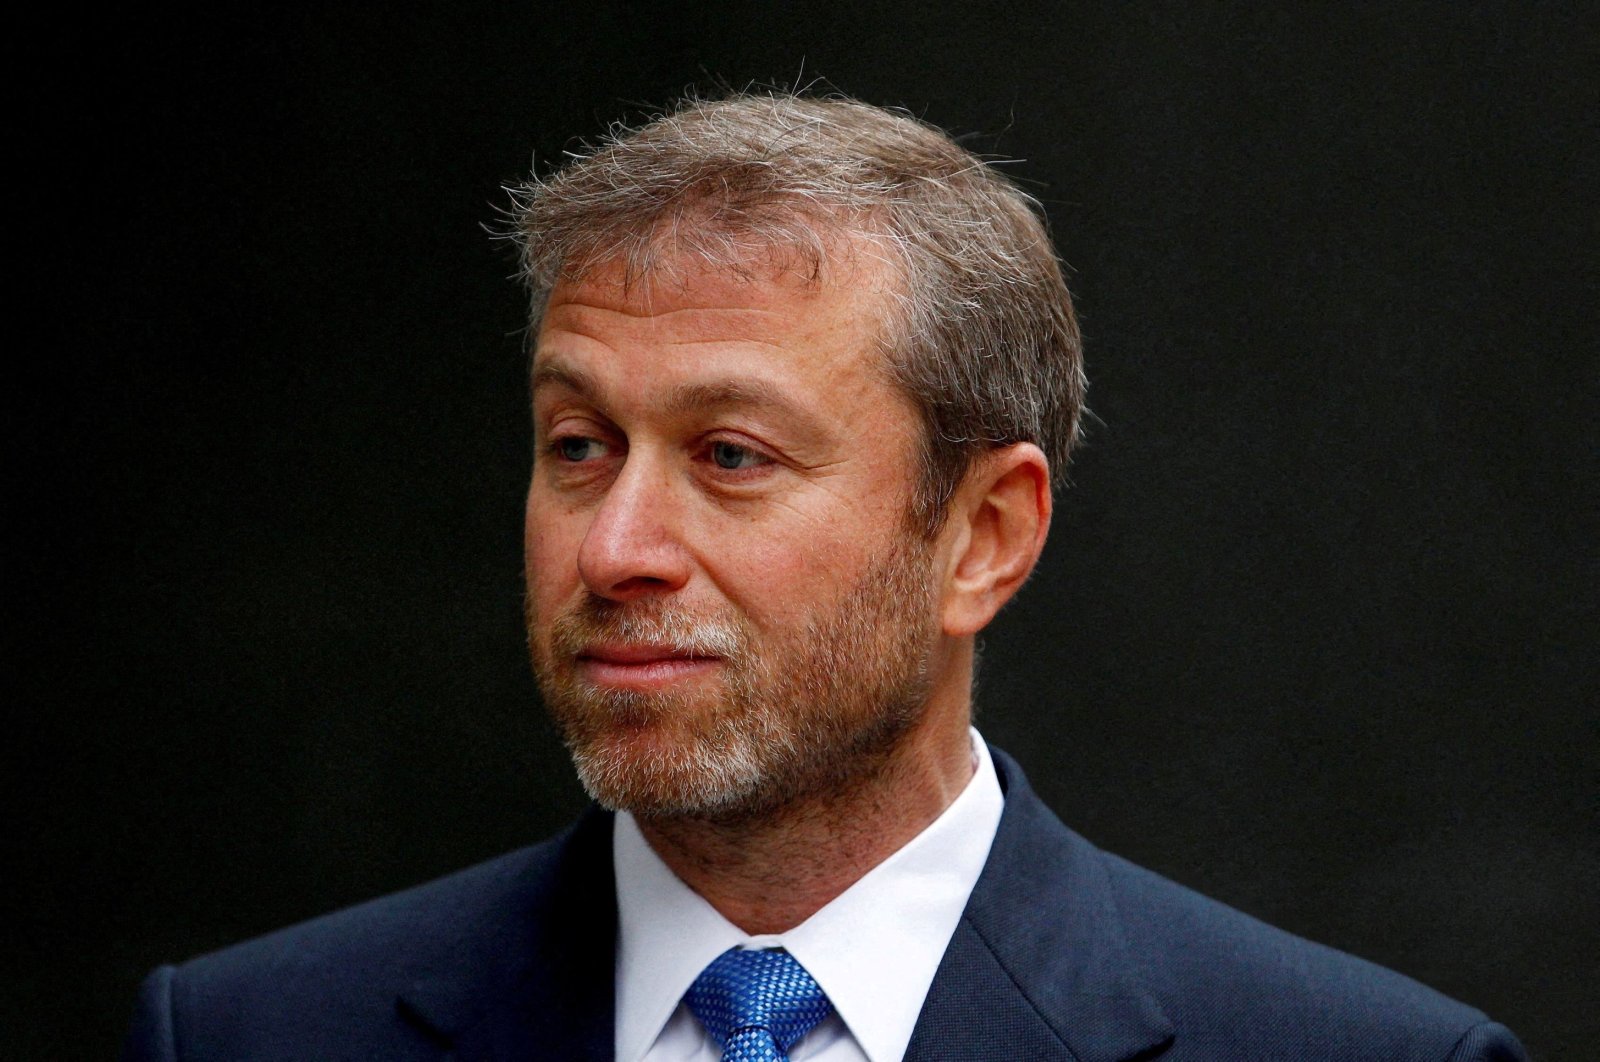 Russian billionaire and then-owner of Chelsea Roman Abramovich arrives at a division of the High Court, London, England, Oct. 31, 2011. (Reuters File Photo)